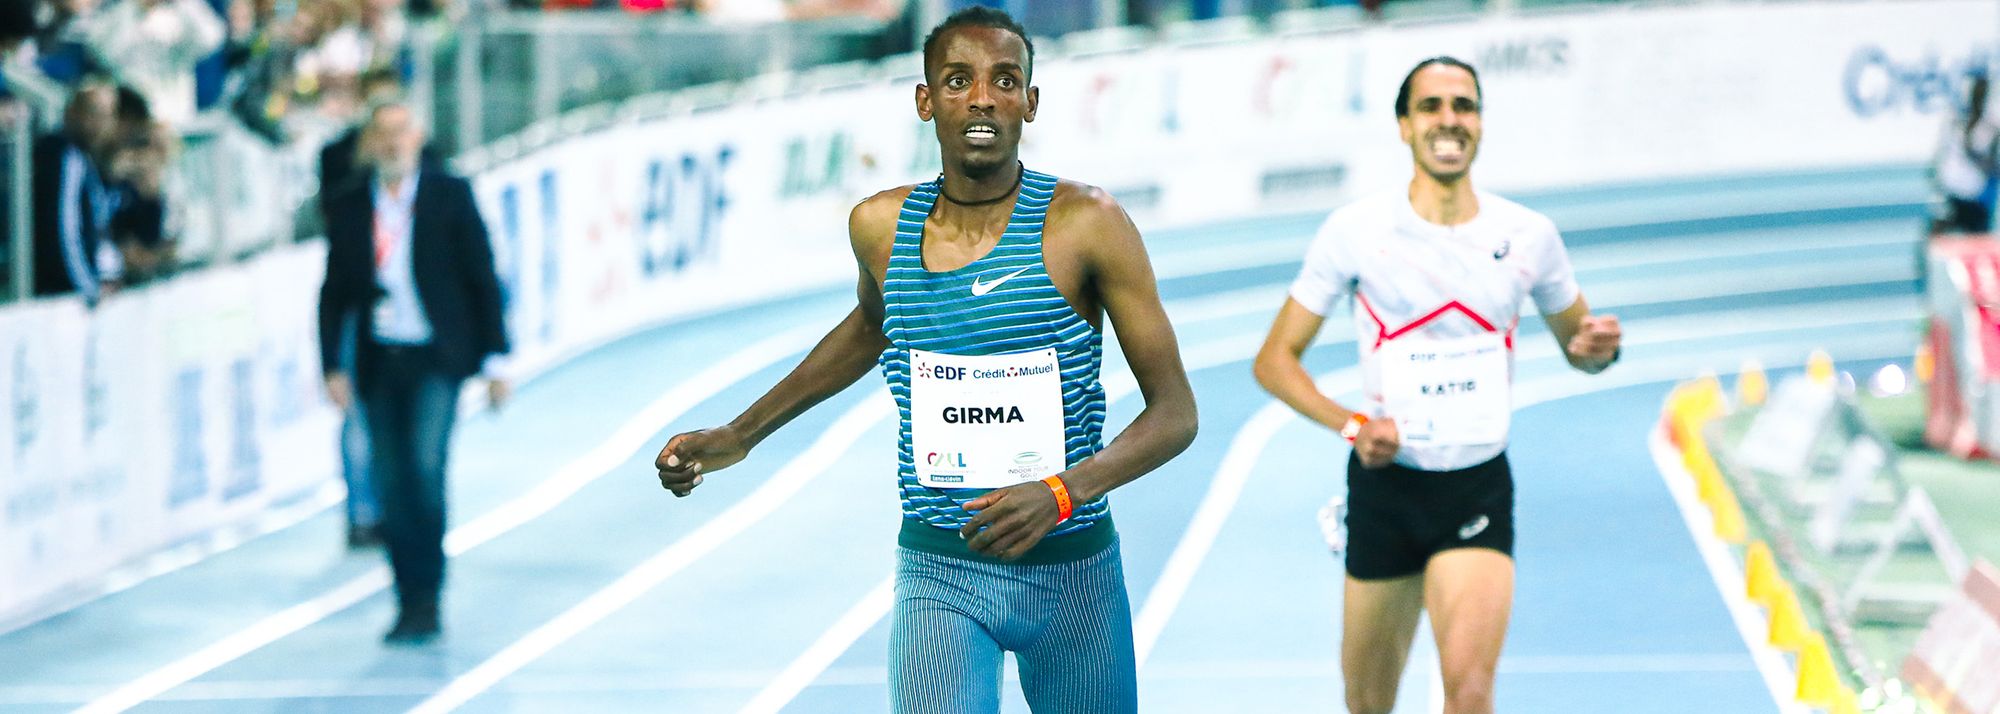 Ethiopia’s Lamecha Girma will return to the scene of his world indoor 3000m record when he competes at the Meeting Hauts-de-France Pas-de-Calais 